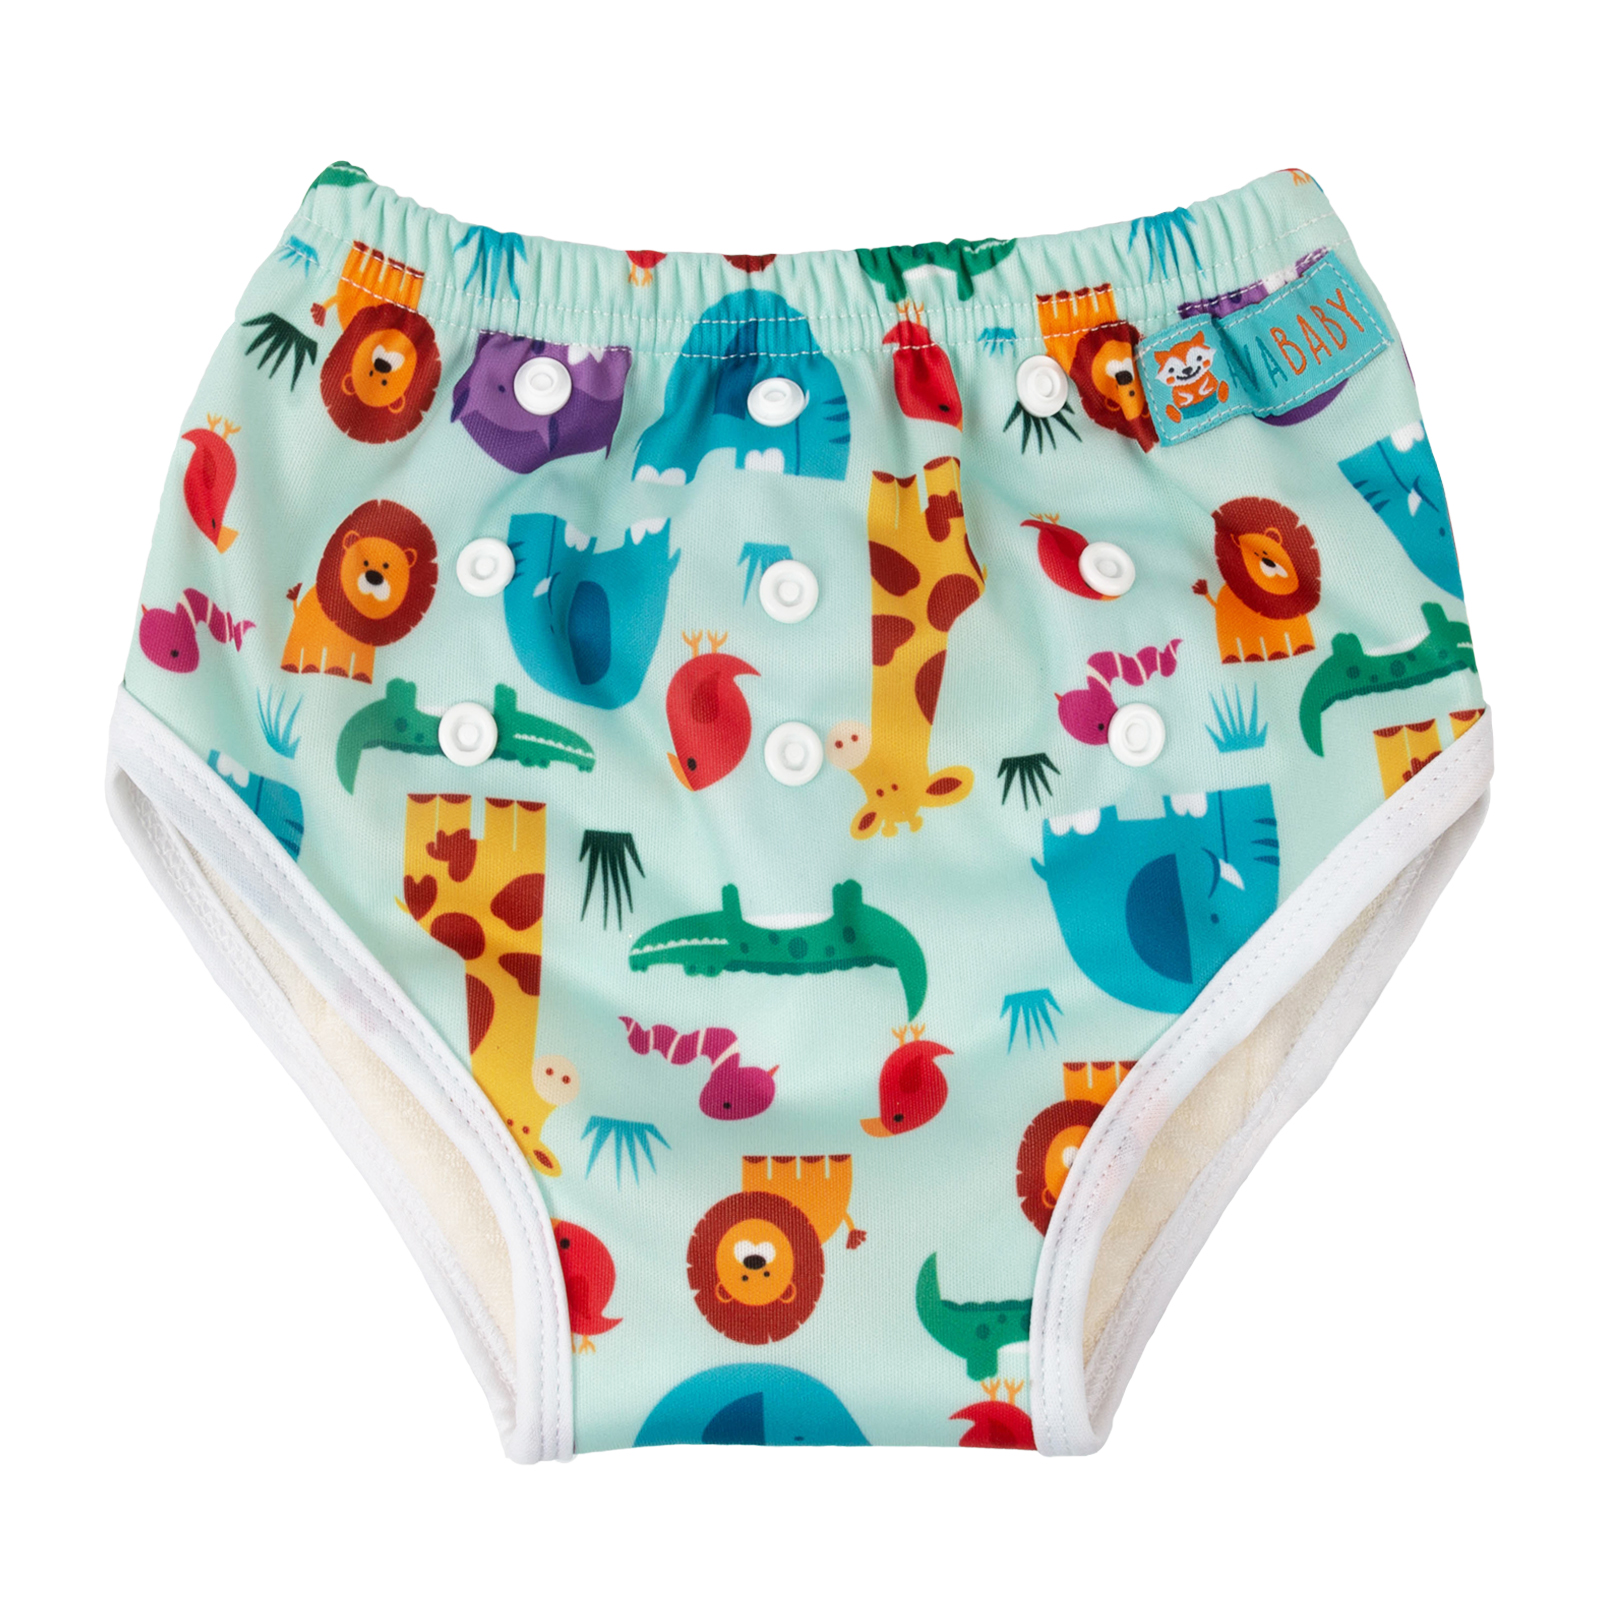 ALVABABY Printed Toddler Training Pant Training Underwear for Potty  Training (XH160)